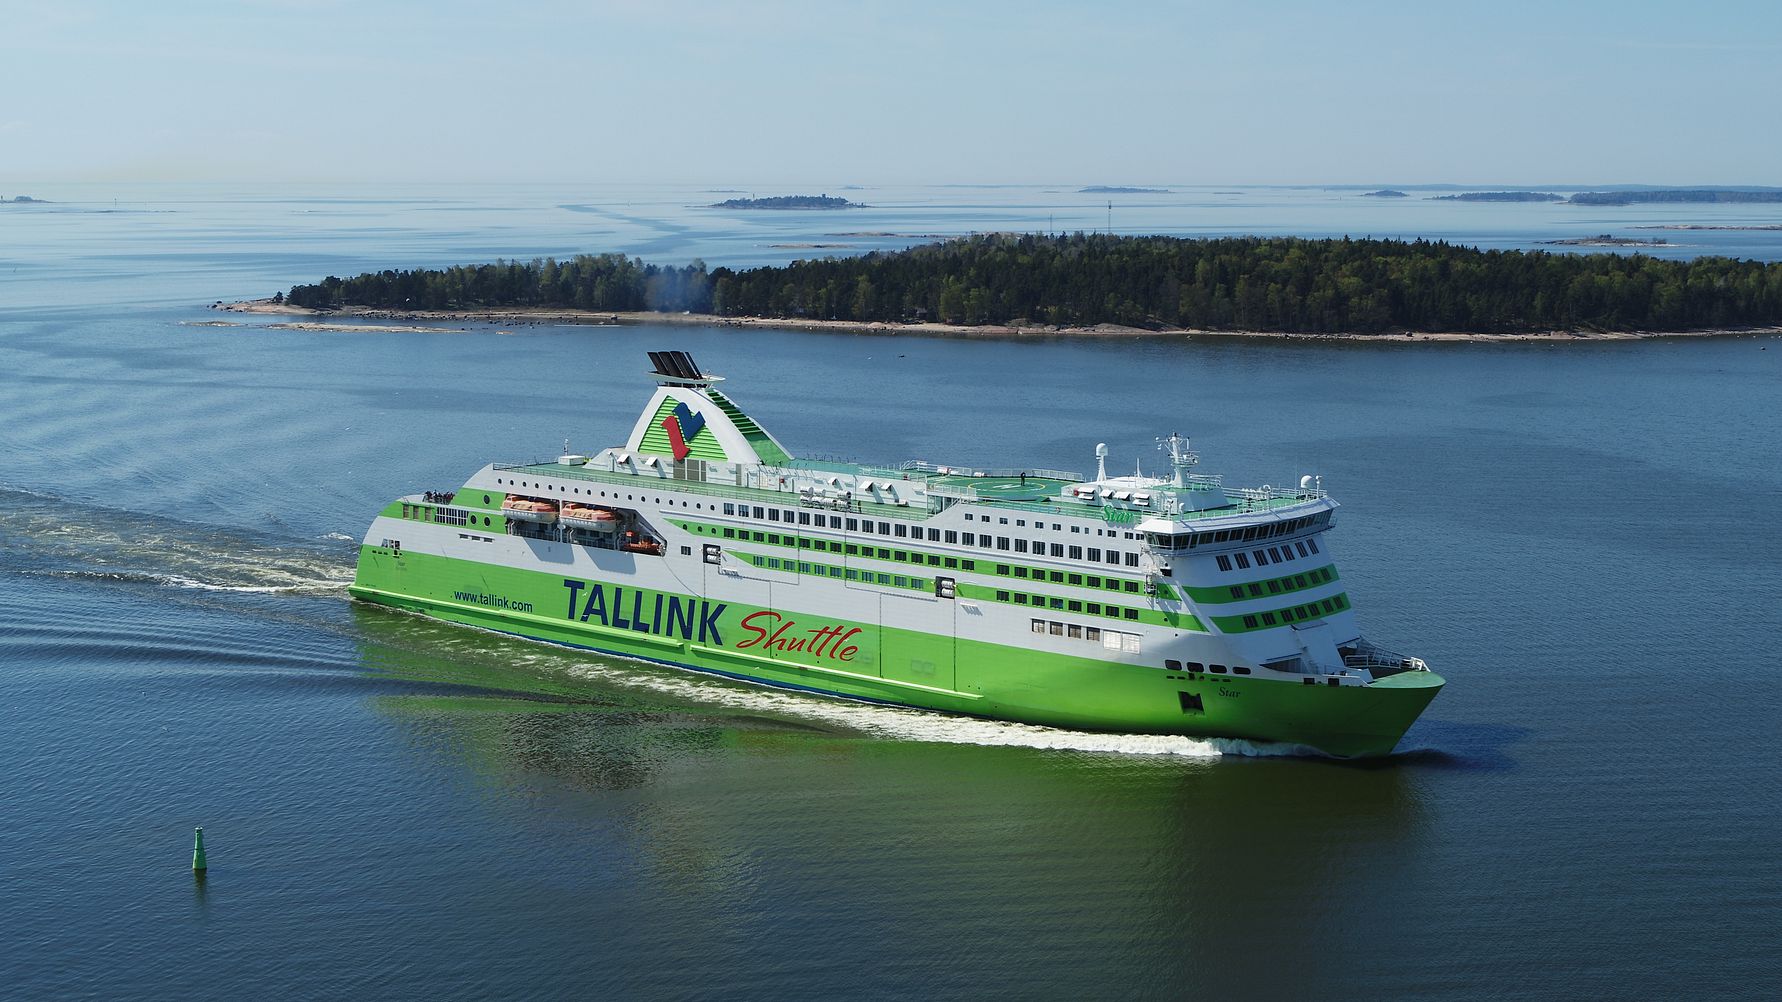 Tallink Group signs a long-term charter agreement for the Star vessel